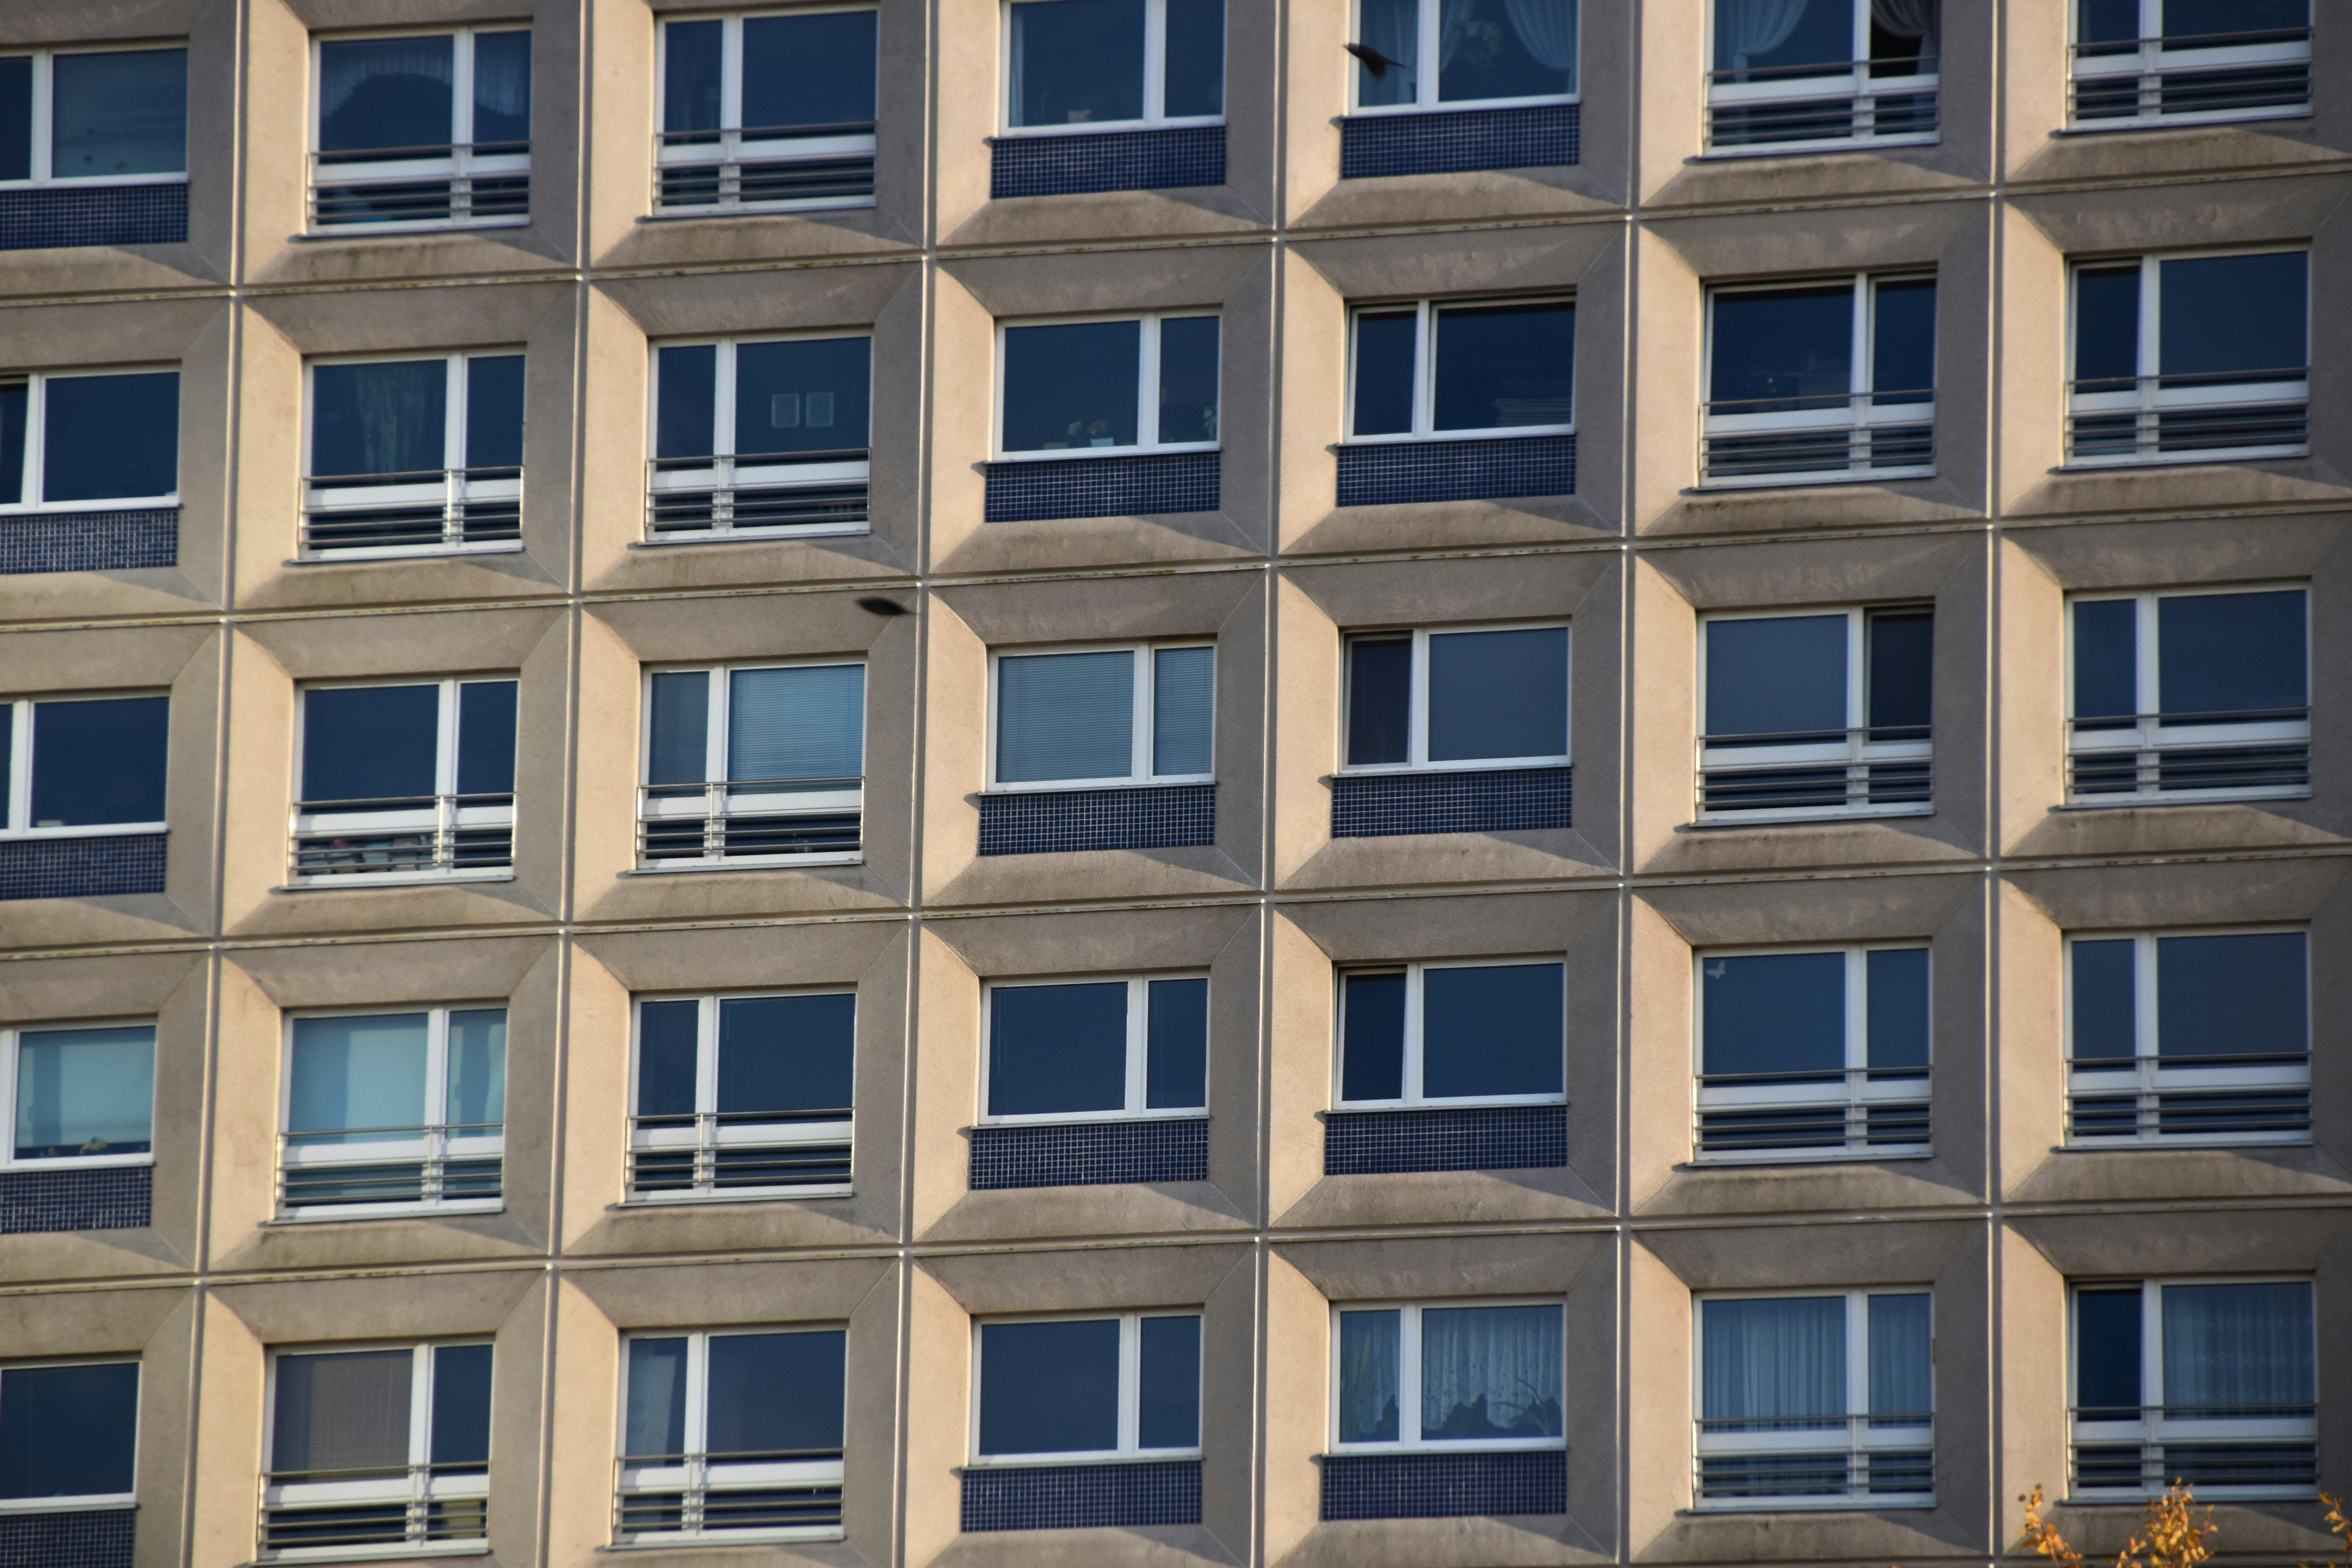 brown and blue concrete building at daytime close-up photography